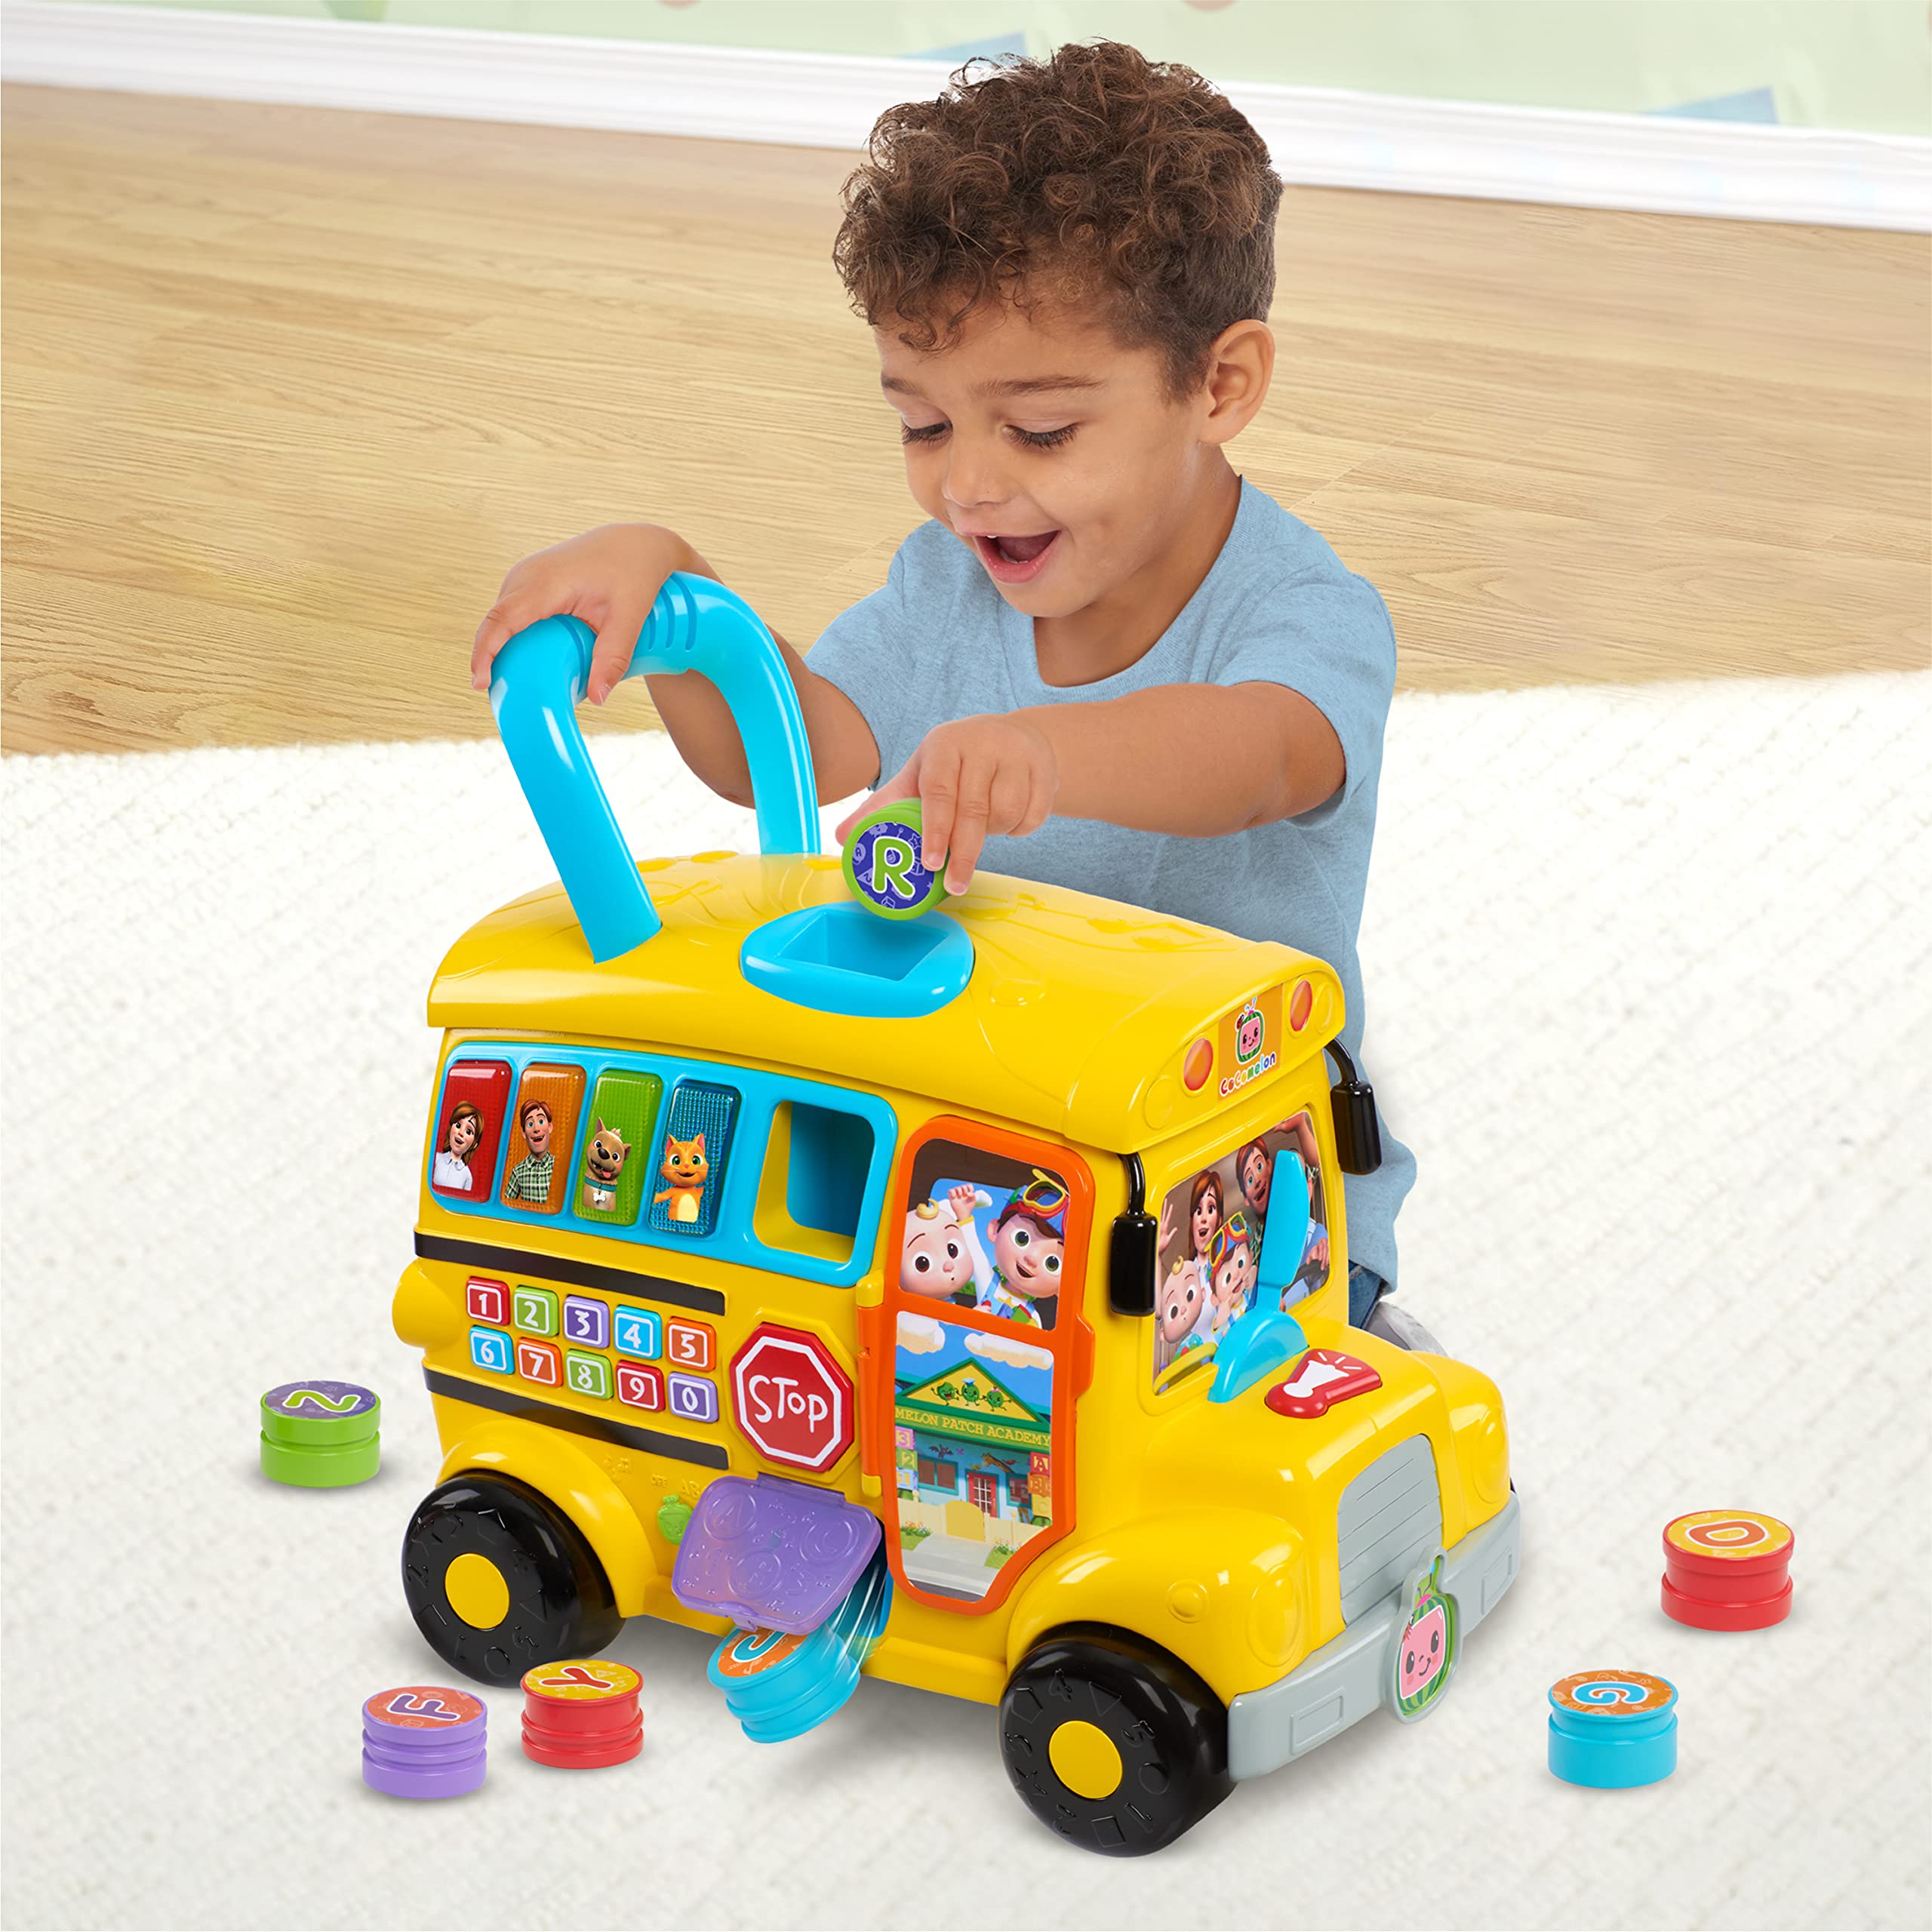 15" CoComelon Ultimate Learning Bus w/ Lights, Sounds & Music $31.10 + Free Shipping